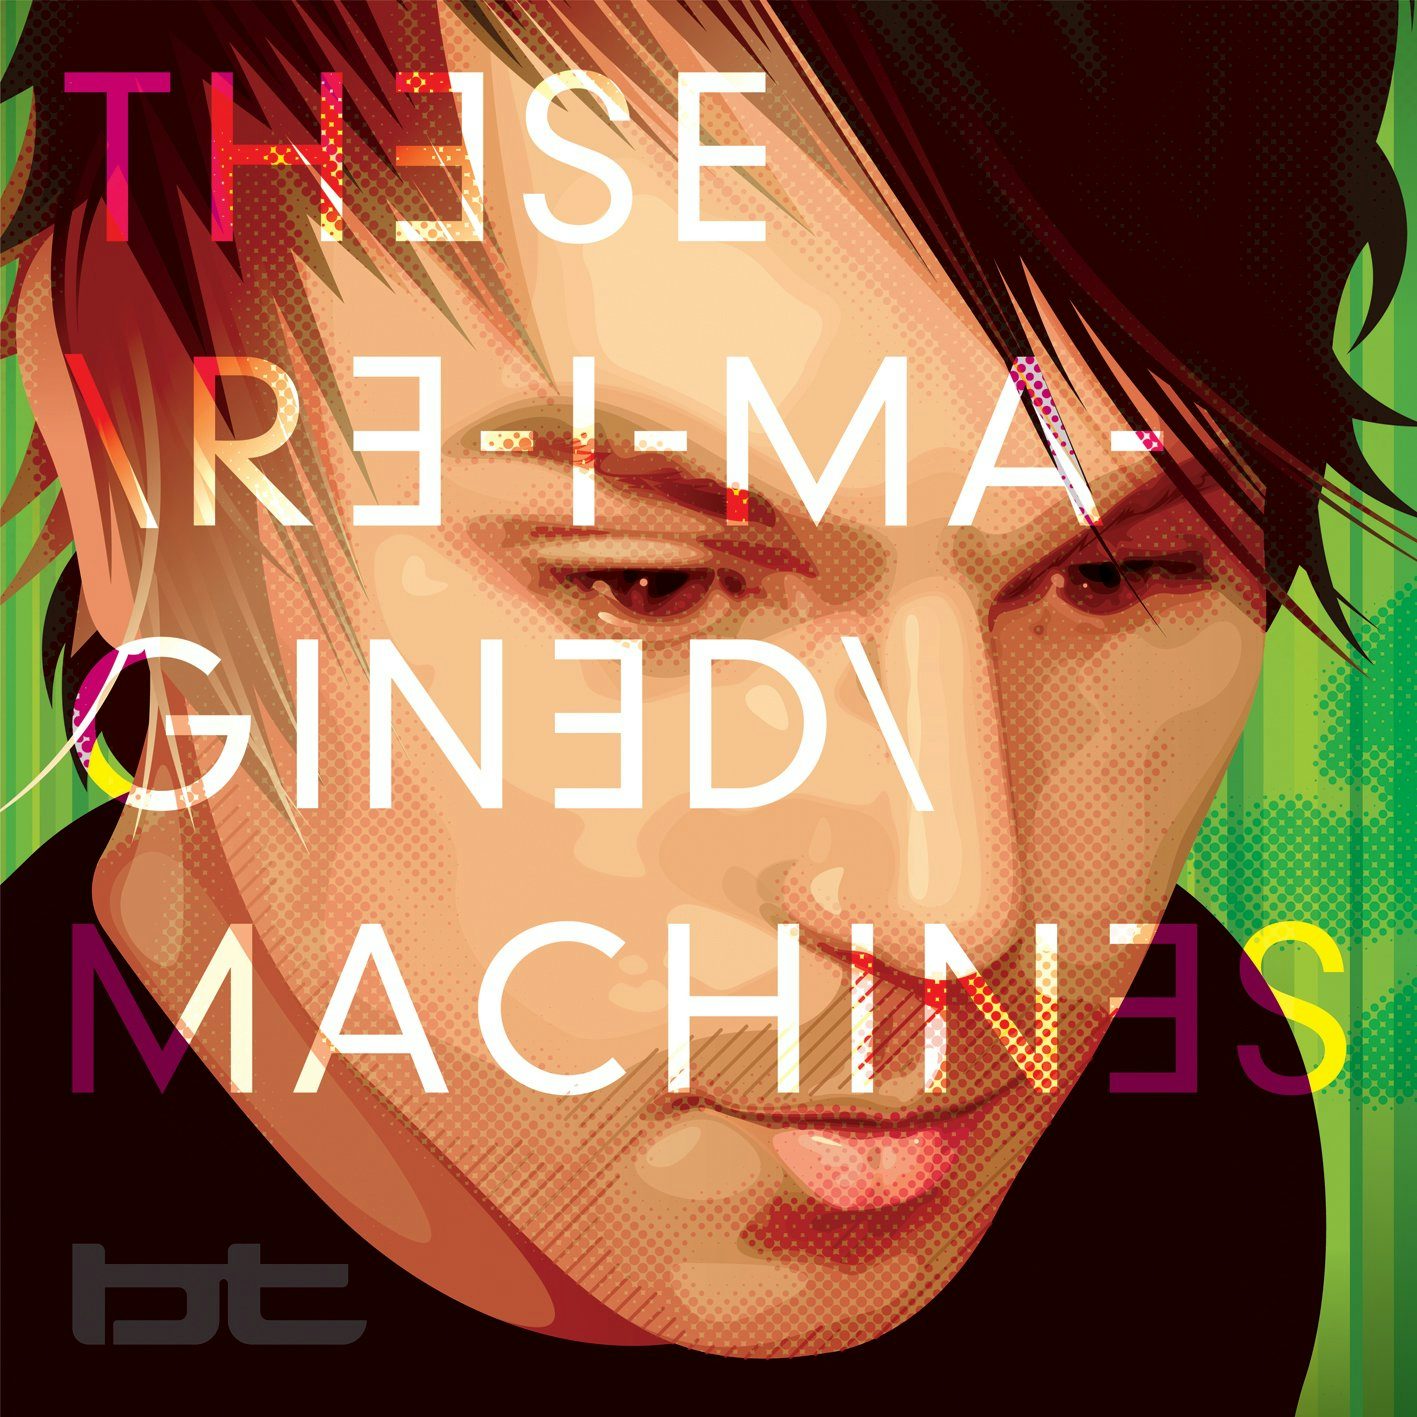 BT These Re-Imagined Machines (Box Set) $41.91